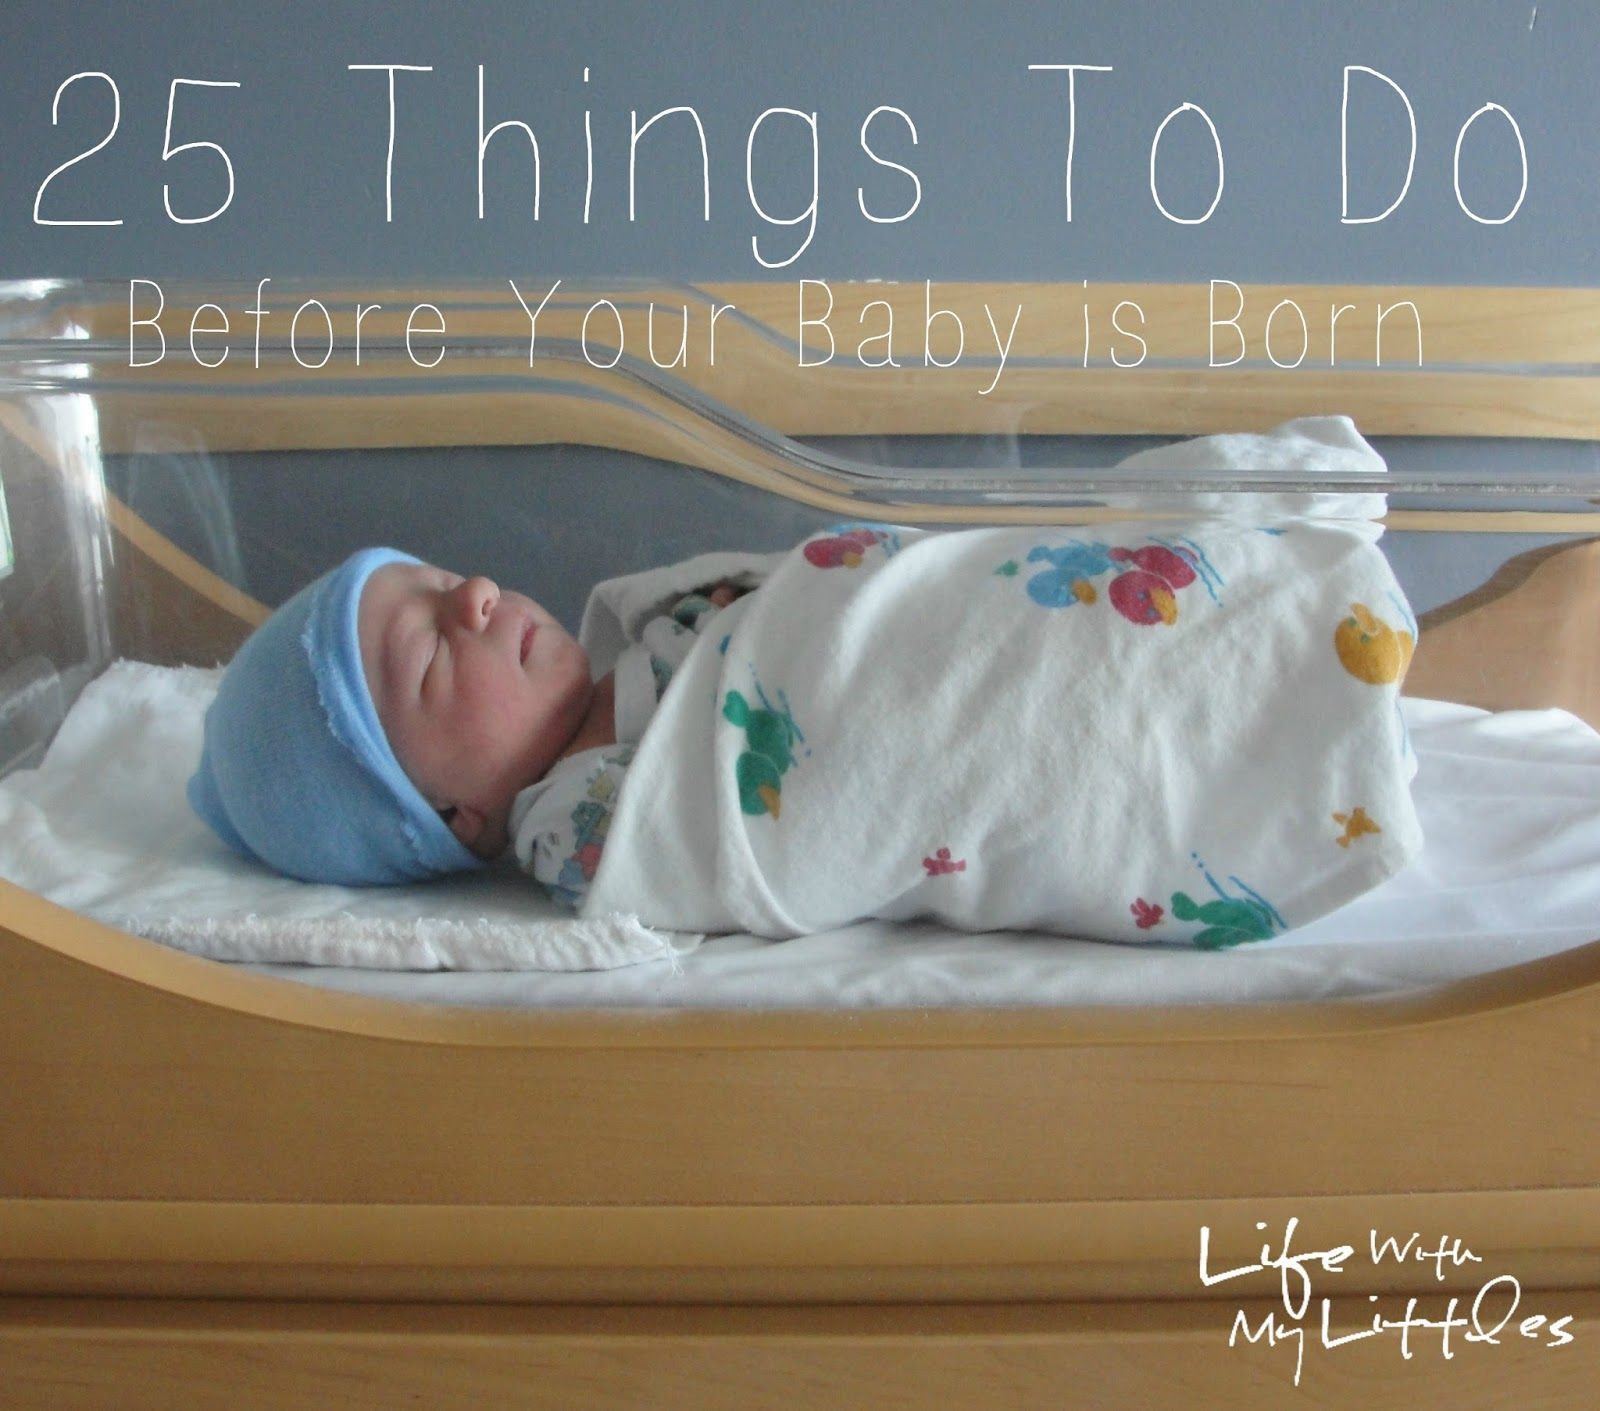 25 Things to Do Before Your Baby is Born: A great list of things to do before your baby is born so that you can be prepared and